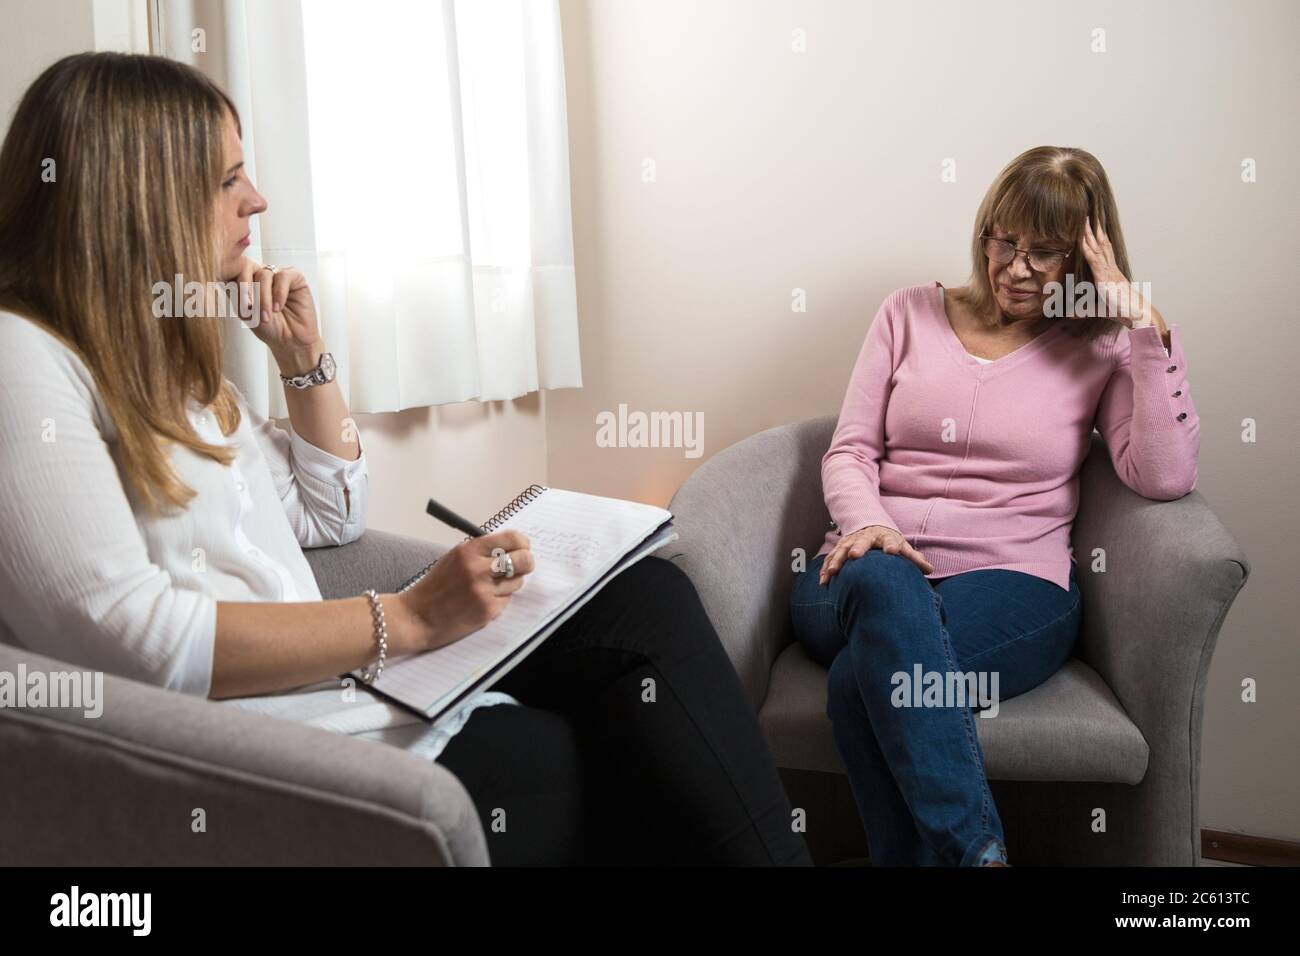 Psychologist in his office attending to a patient and taking note. Stock Photo